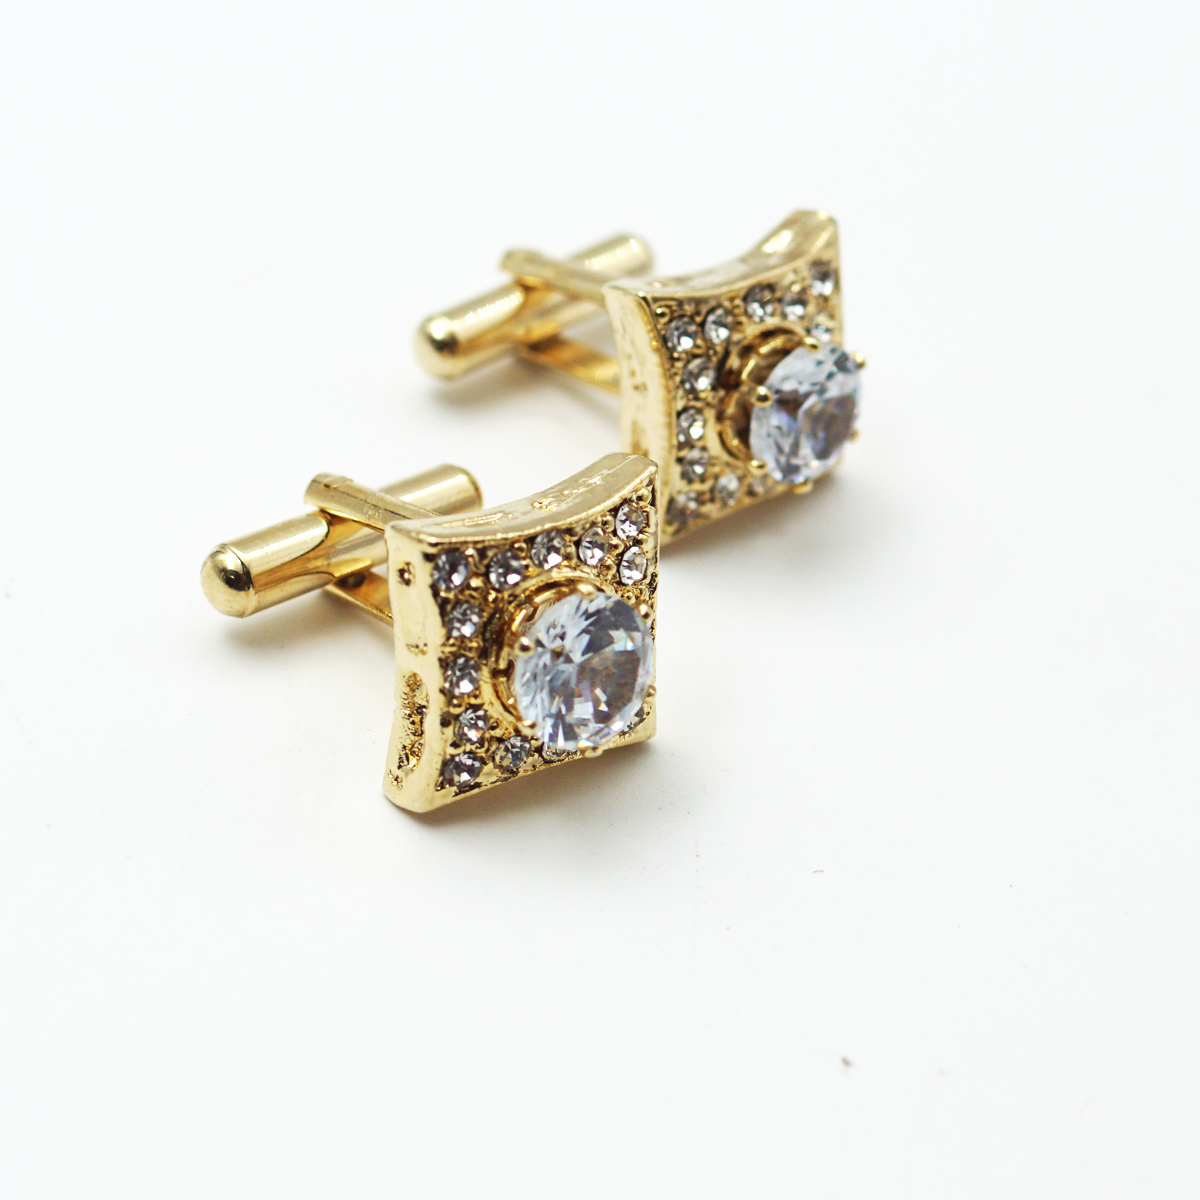 penhose.in Gold With White Stone Cufflinks For Men SKU 87372